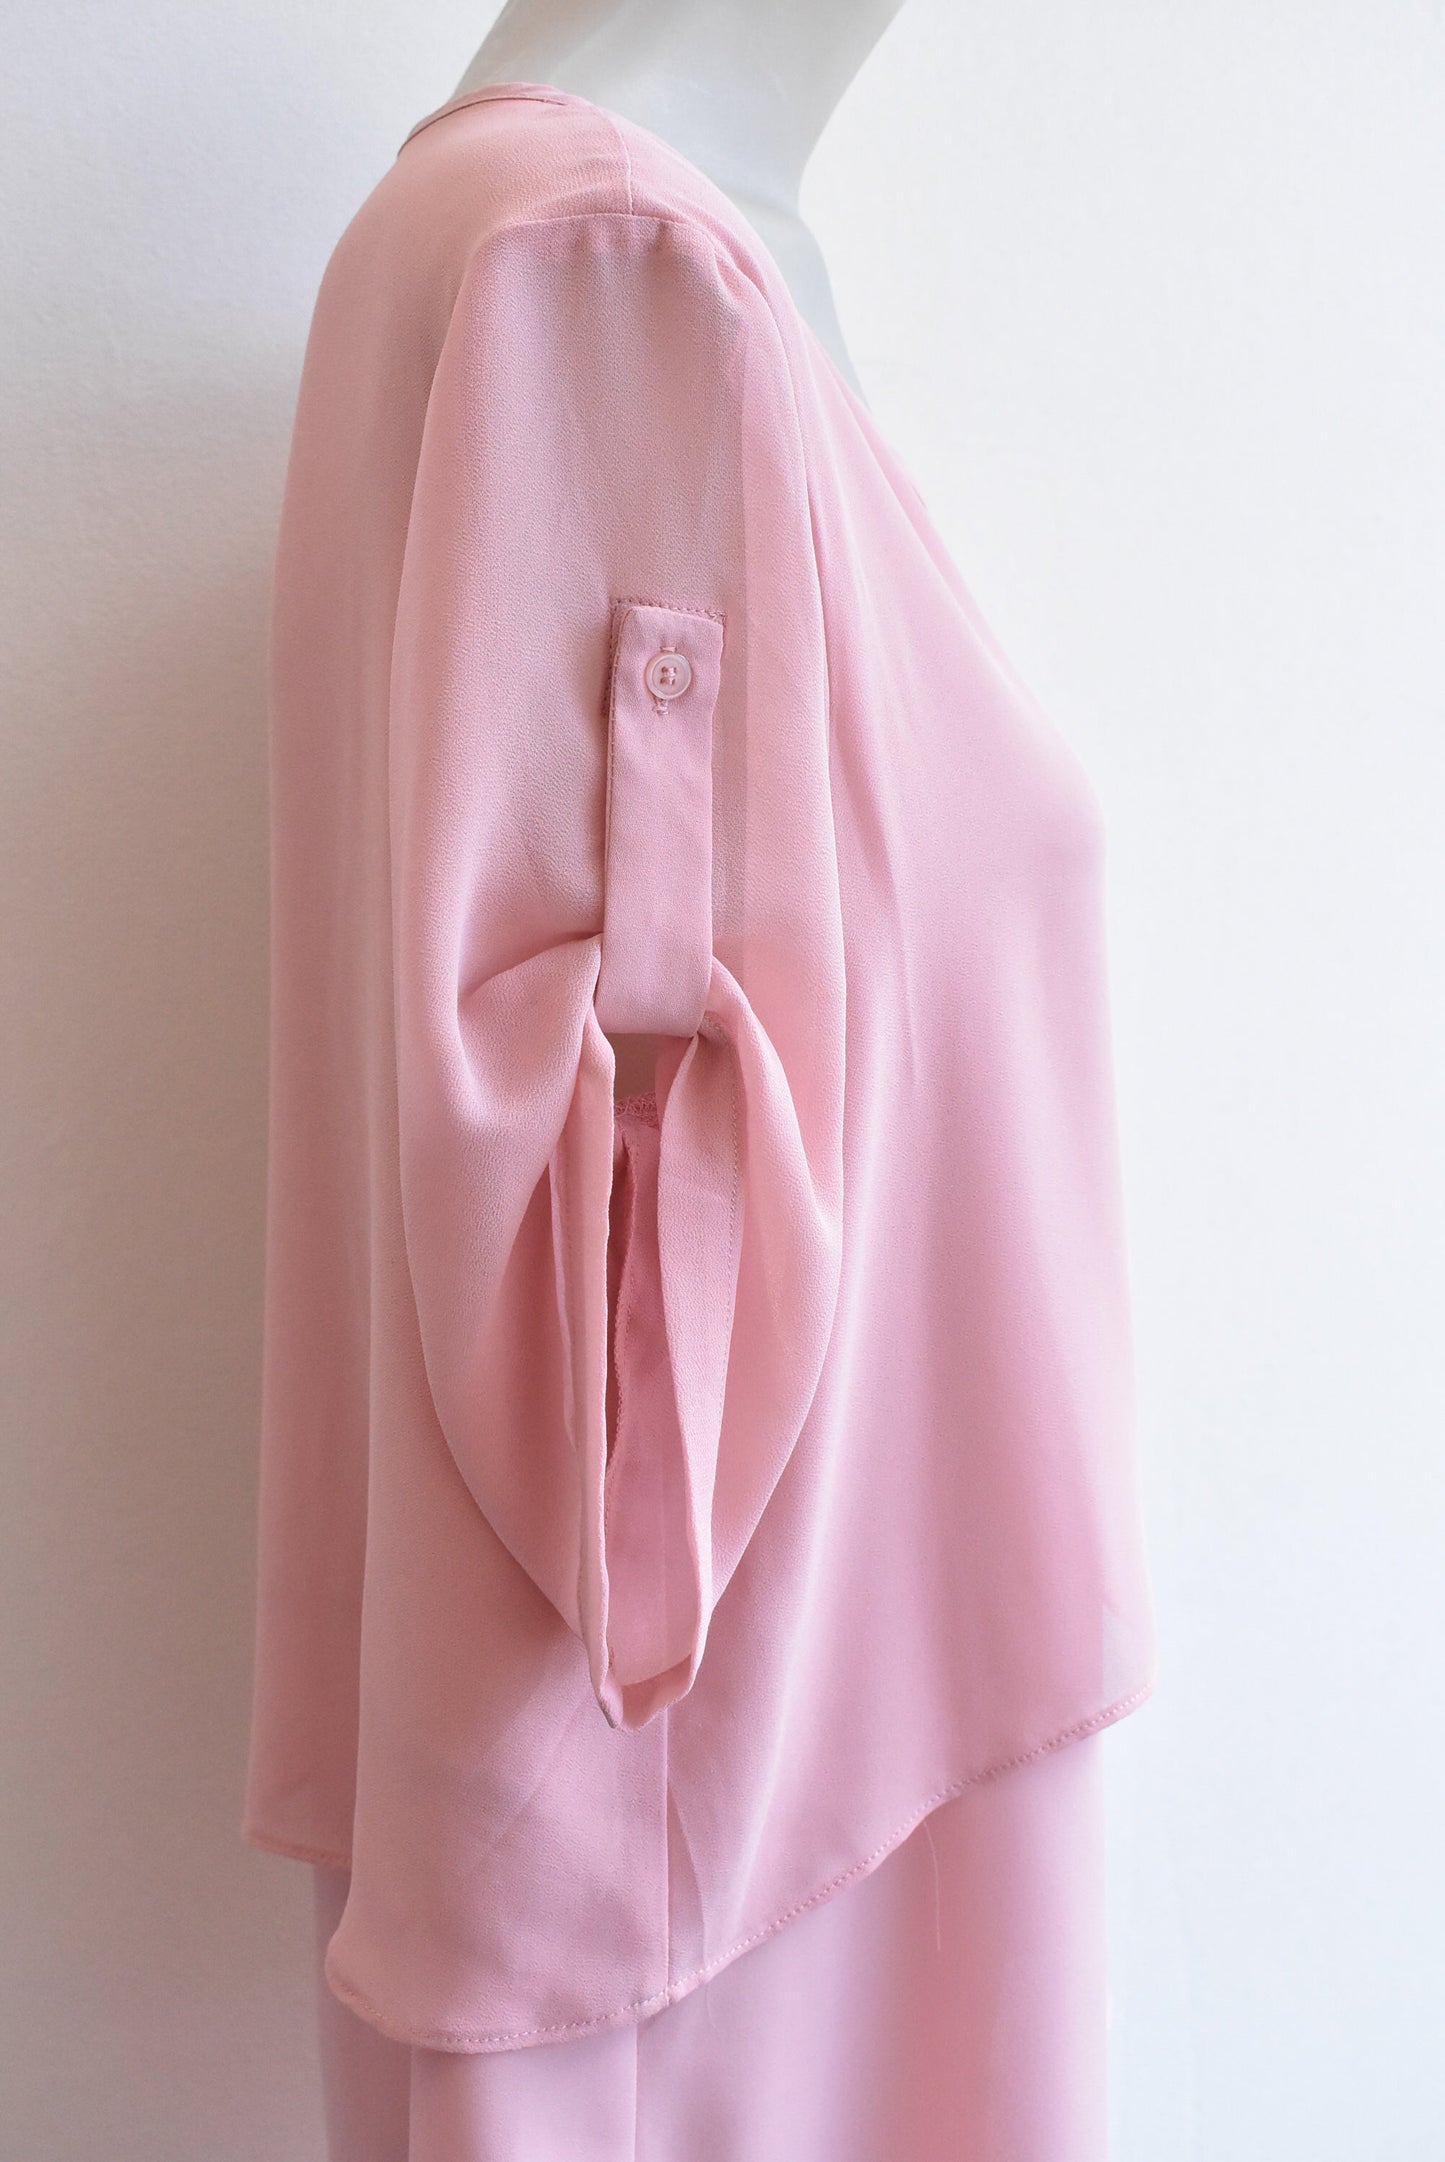 Capture baby pink flowy layered top, size M